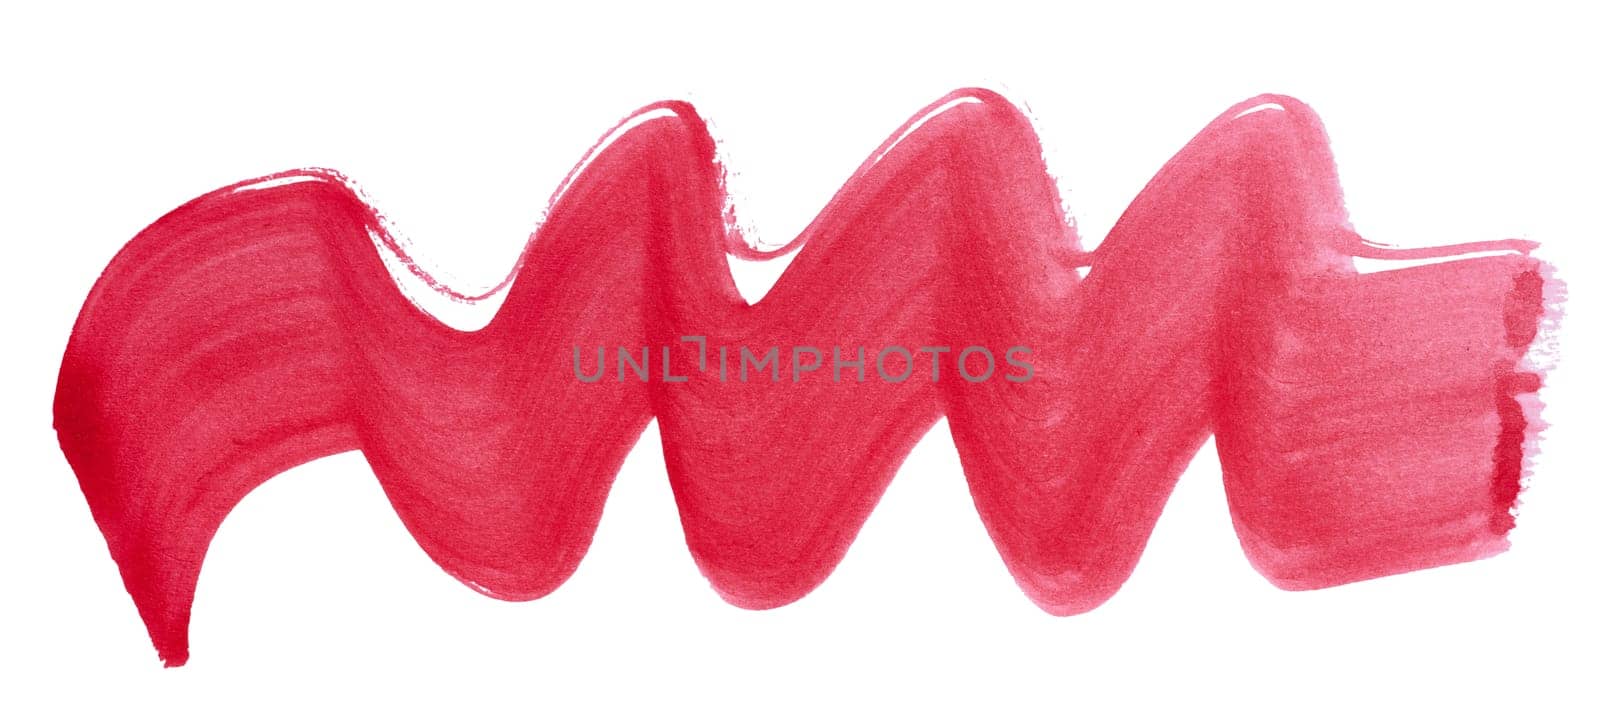 Watercolor brush stroke of red paint, on a white isolated background by ndanko